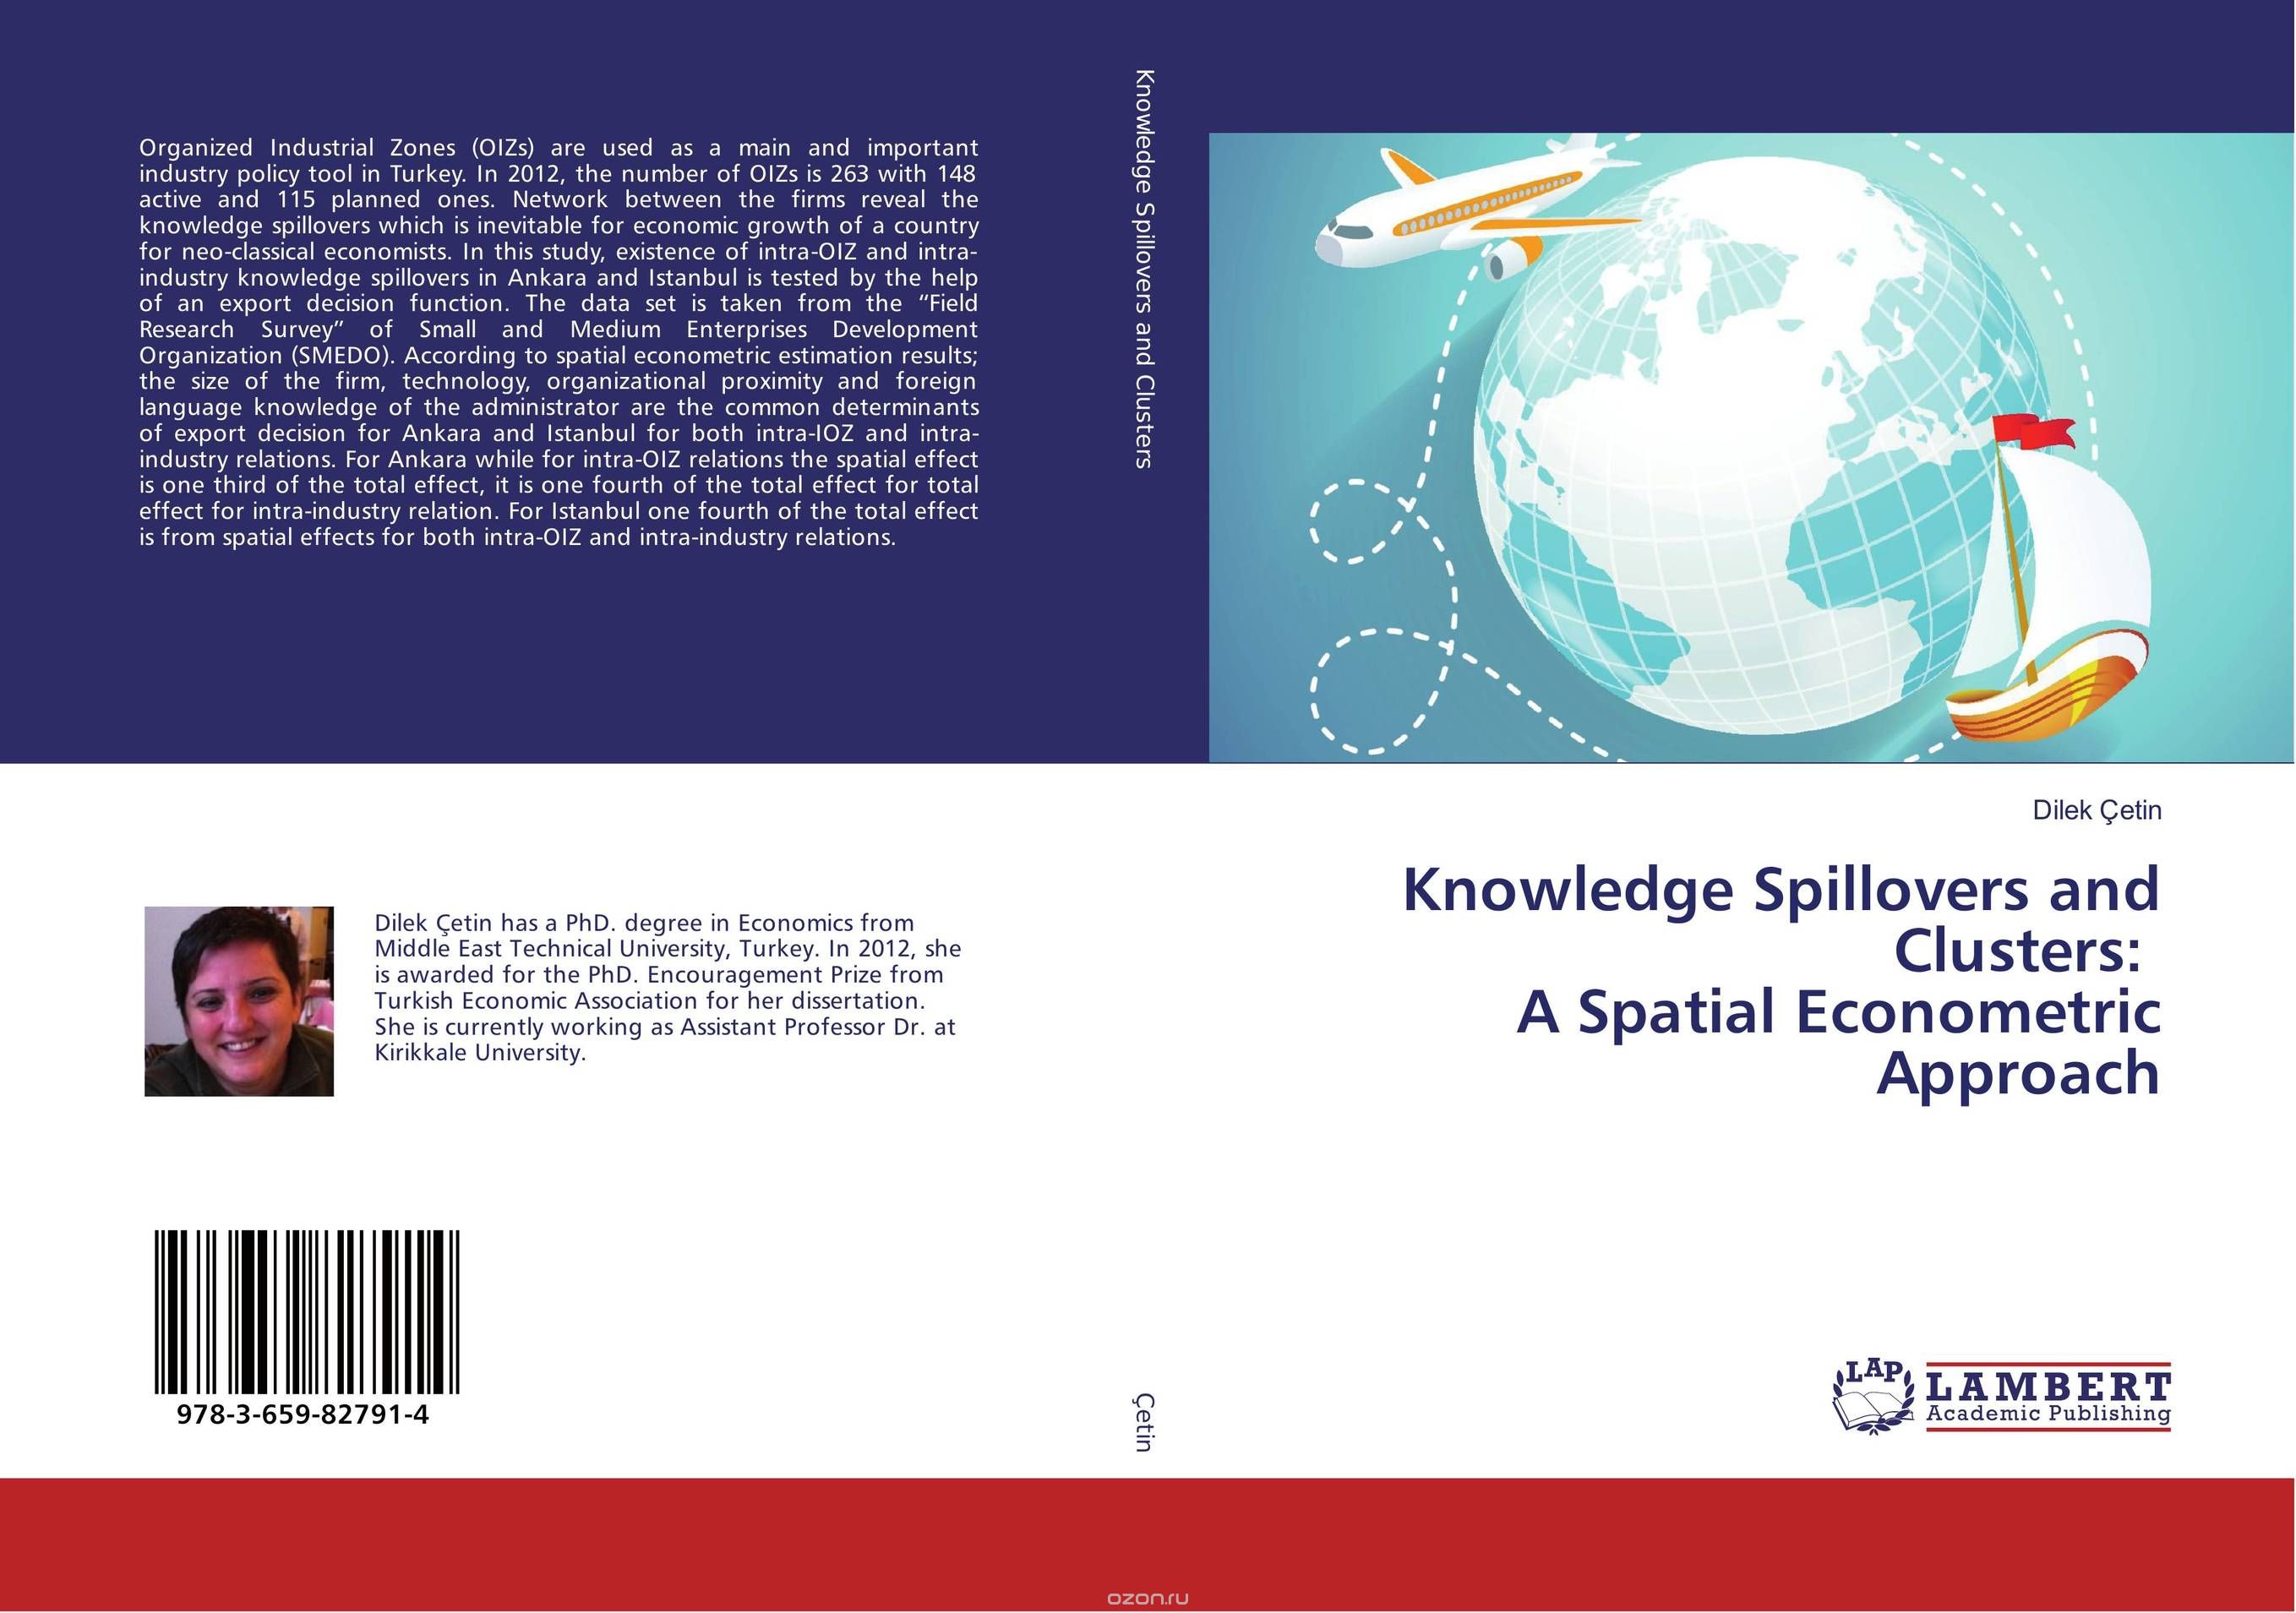 Knowledge Spillovers and Clusters: A Spatial Econometric Approach